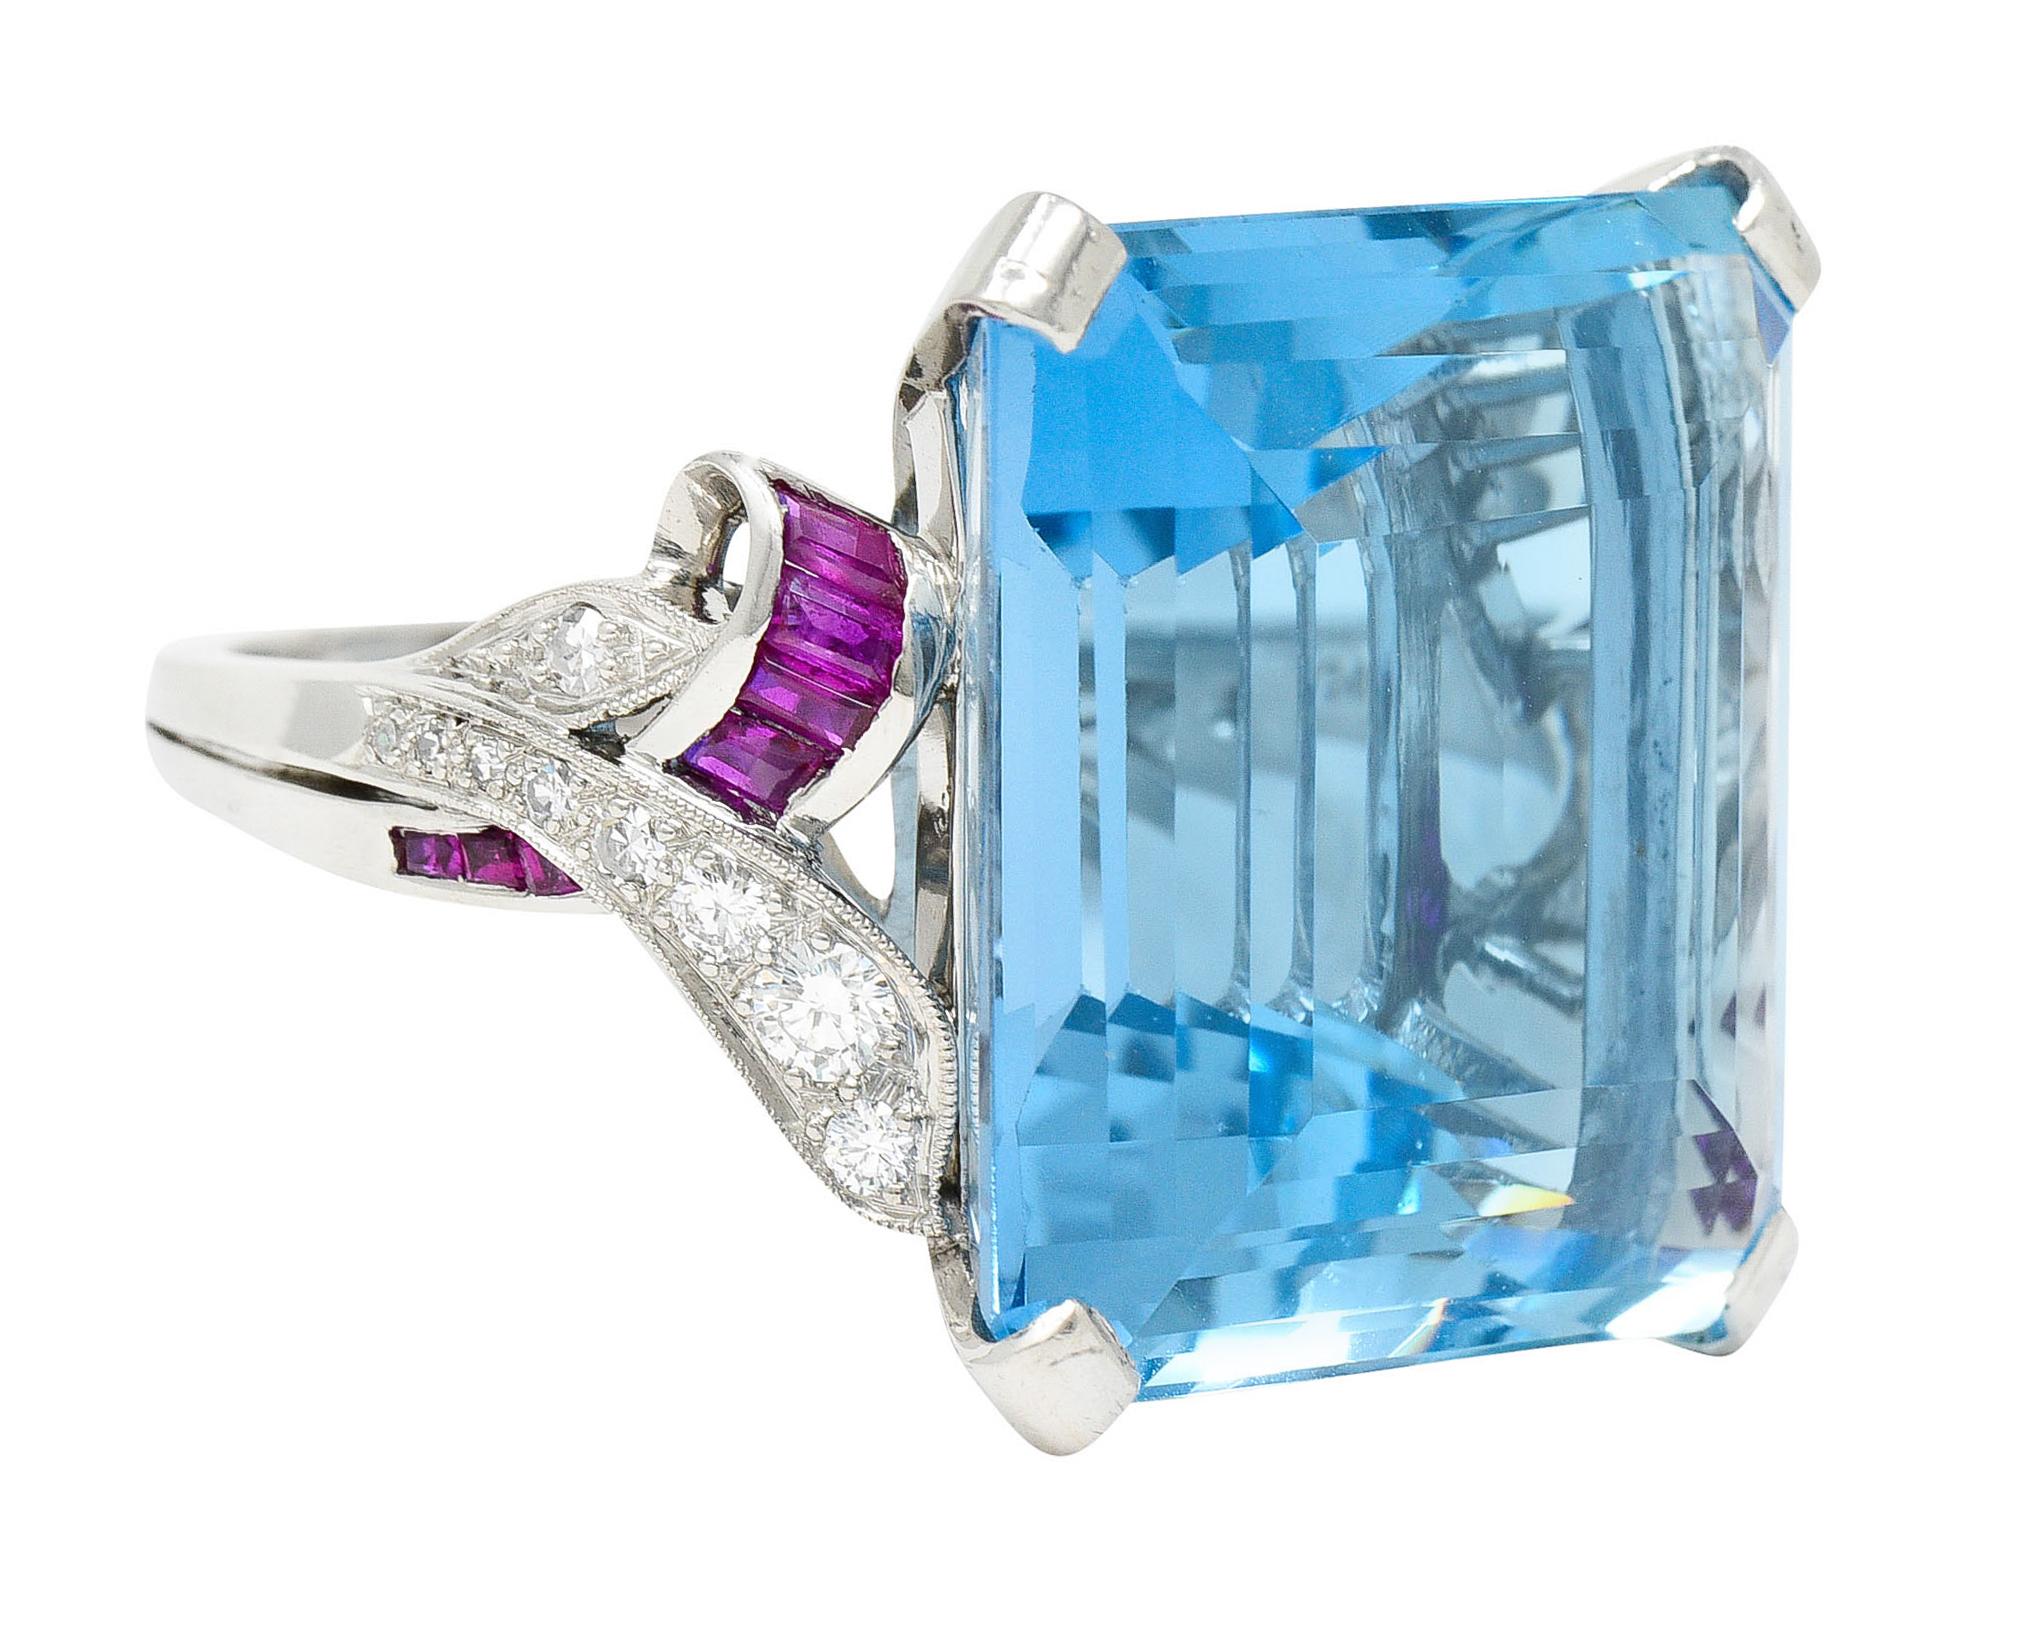 Featuring an emerald cut aquamarine weighing approximately 32.82 carats

Transparent with vivid and uniform greenish blue Santa Maria color

Basket set by wide prongs and flanked by decoratively scrolled shoulders

Channel set with calibrè cut